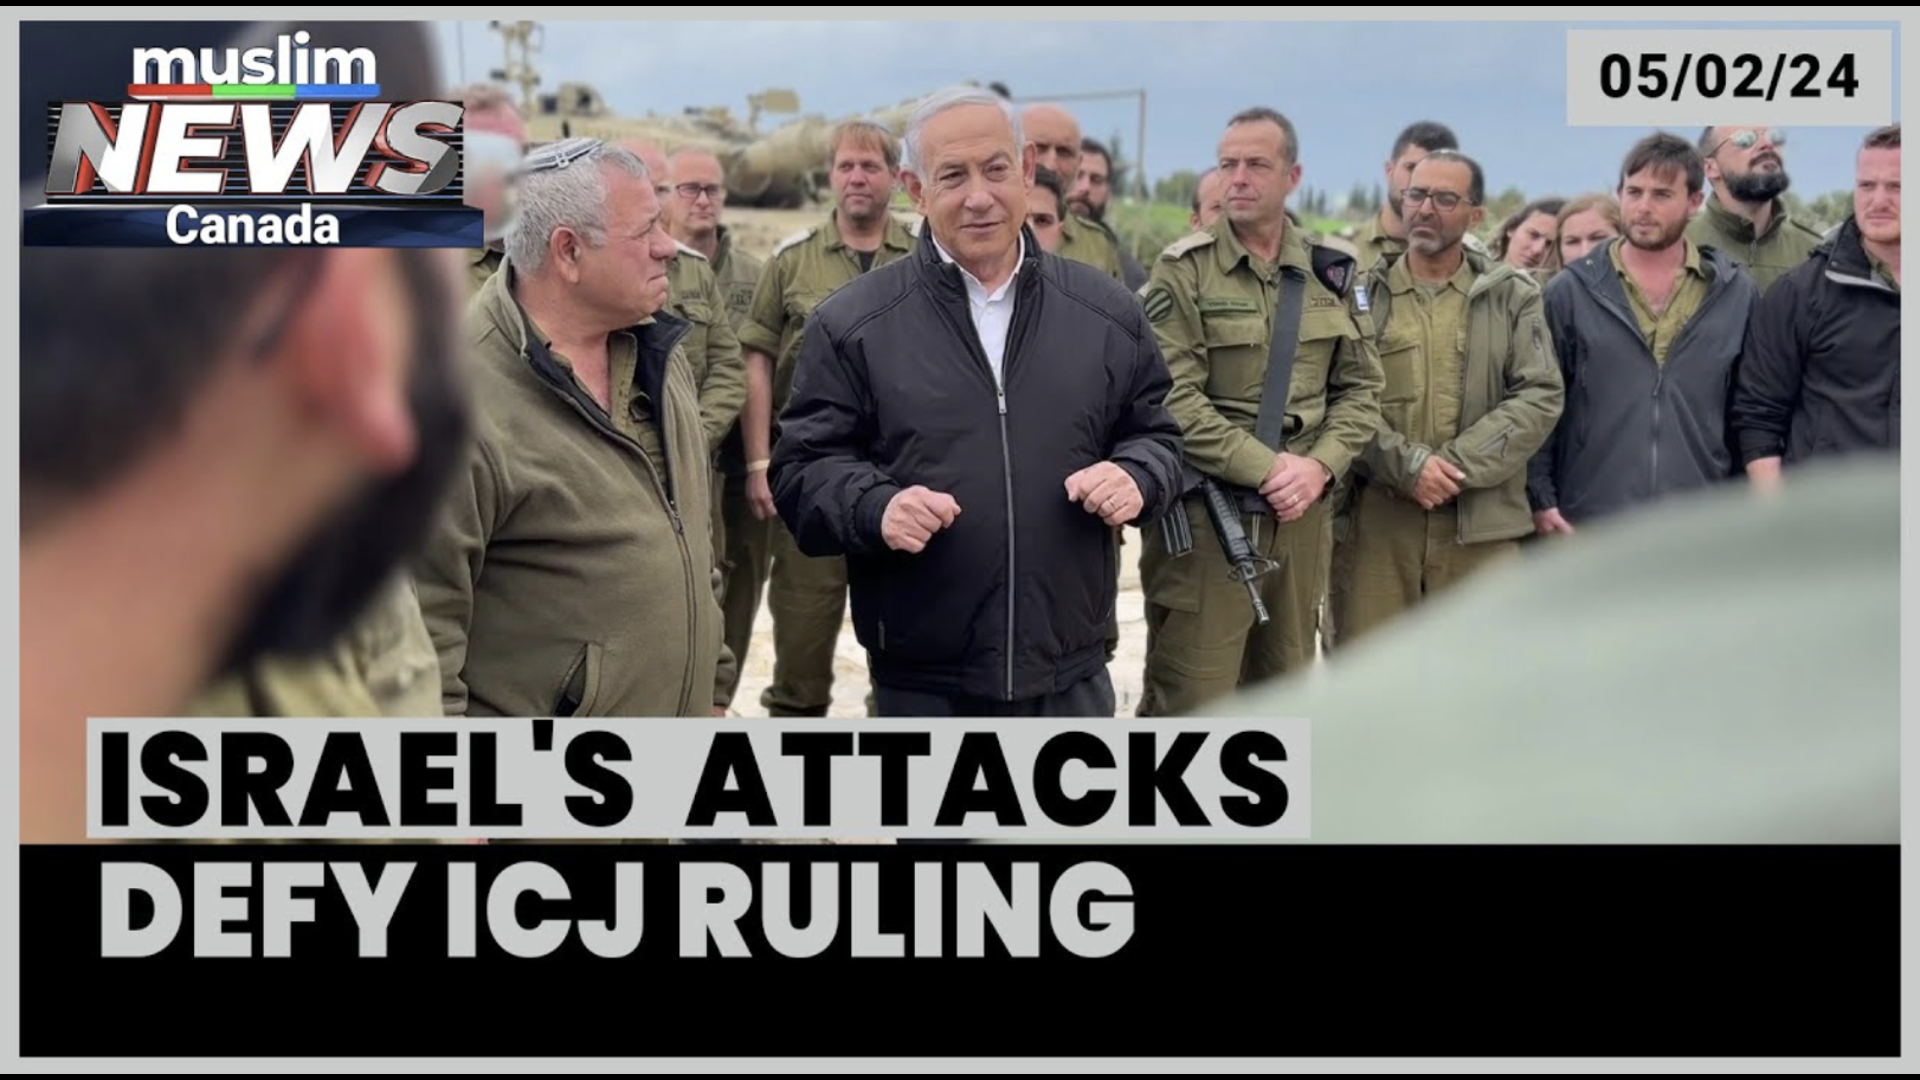 Israel's attacks continue despite the world court's ruling to protect civilians | Feb 05, 2024